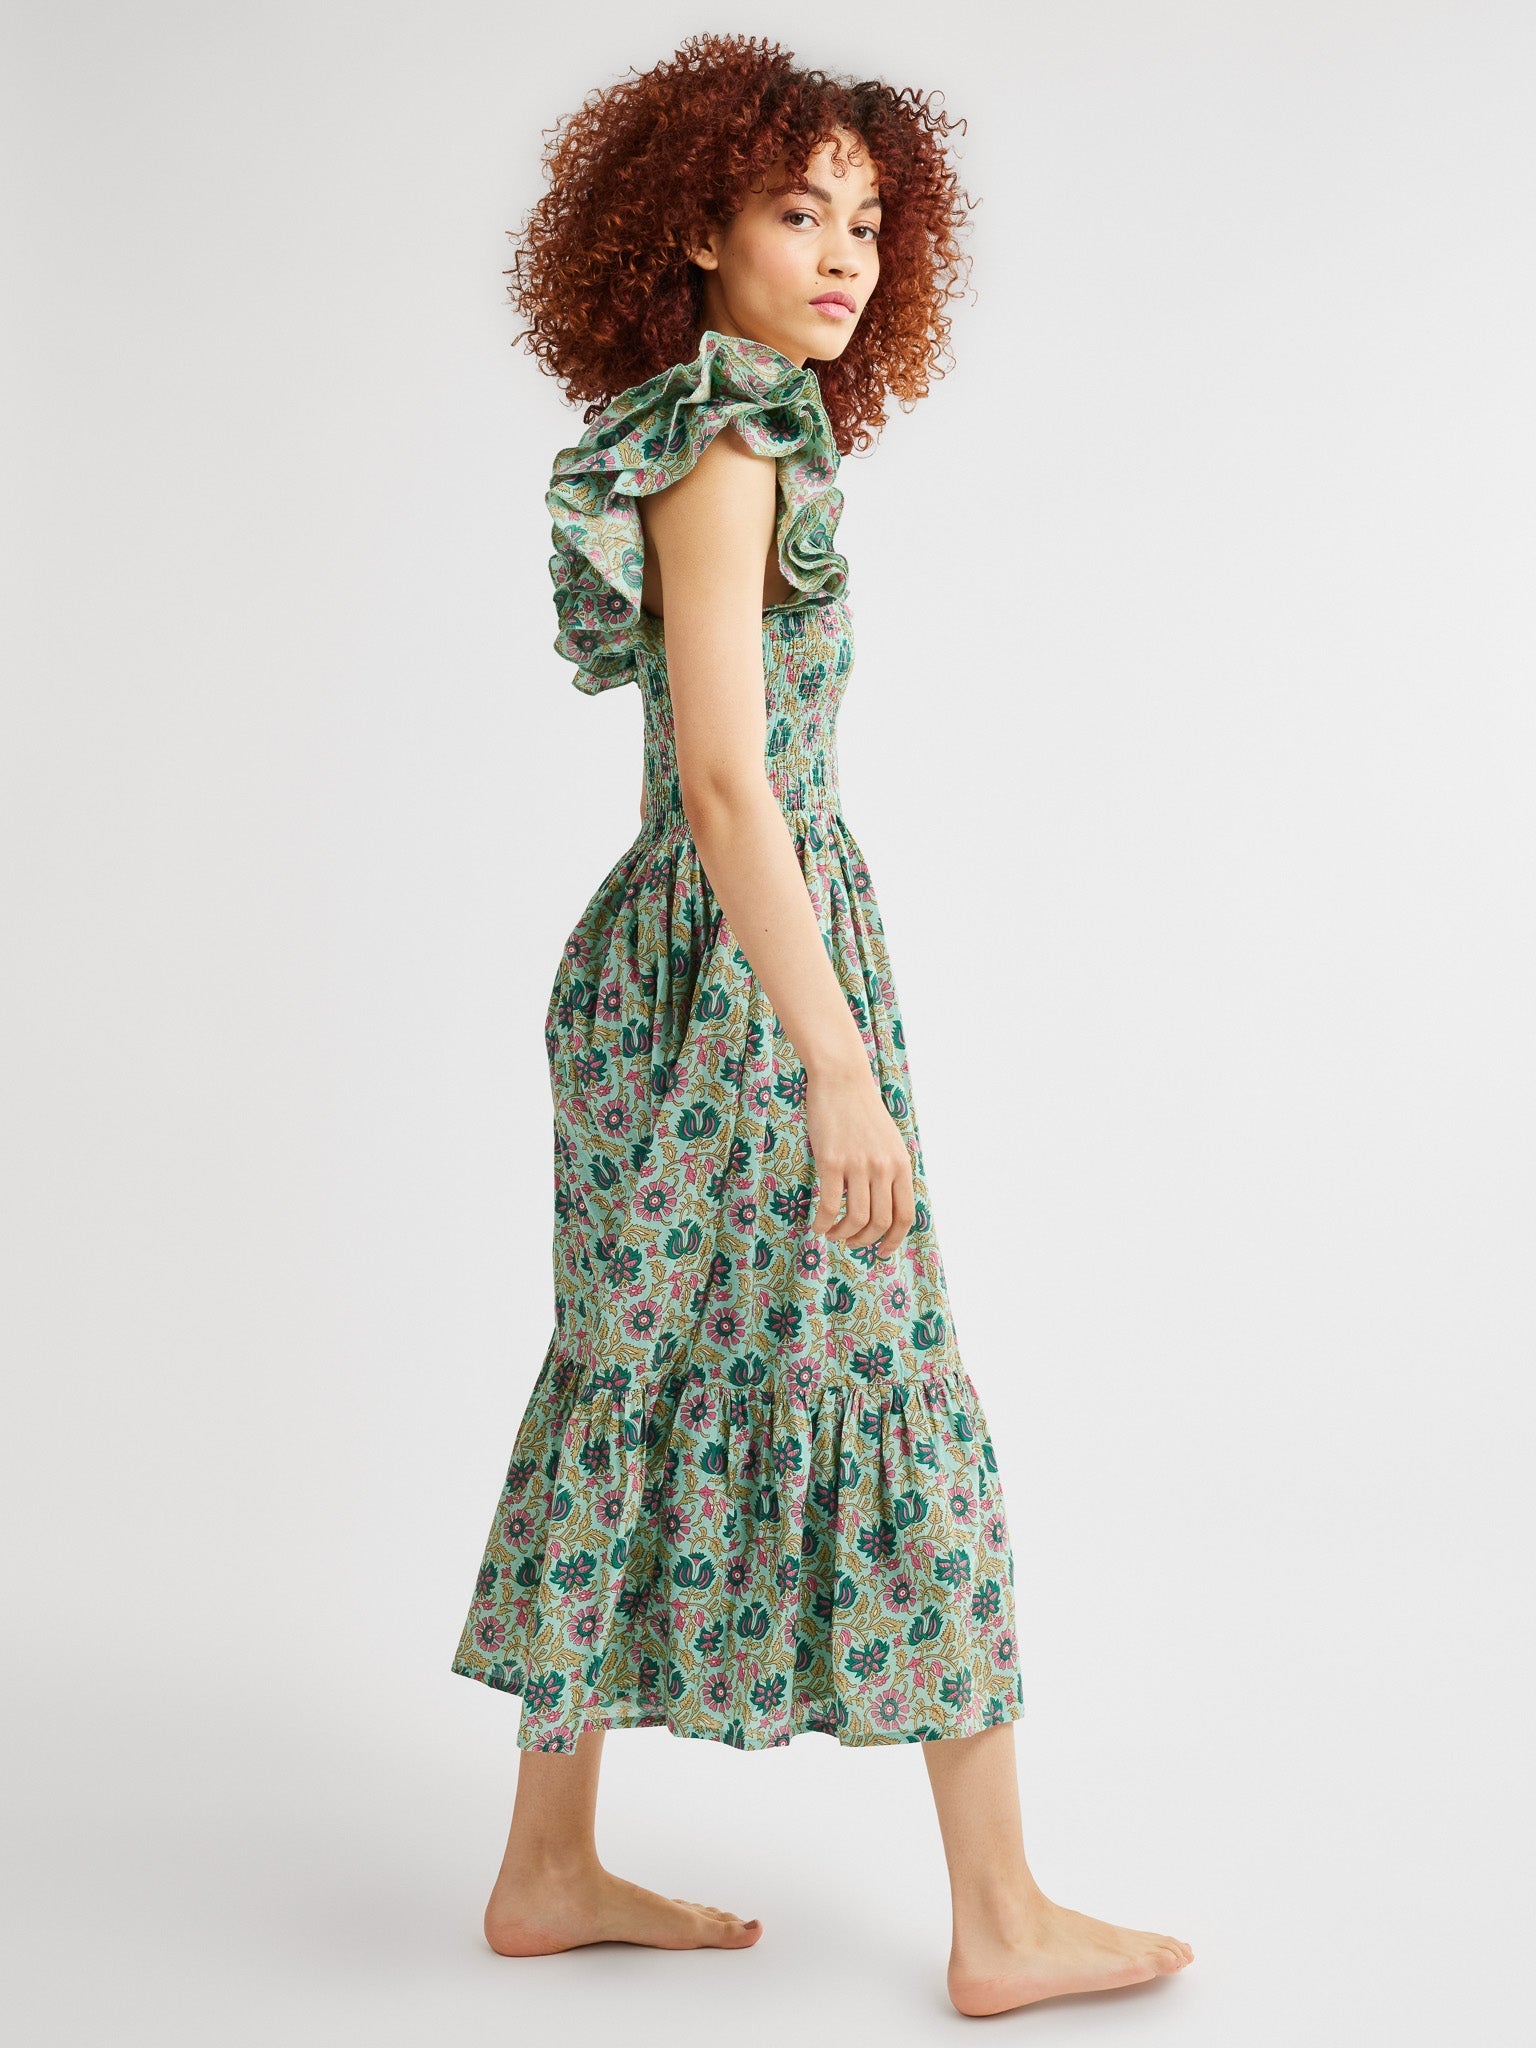 MILLE Clothing Olympia Dress in Caribbean Floral